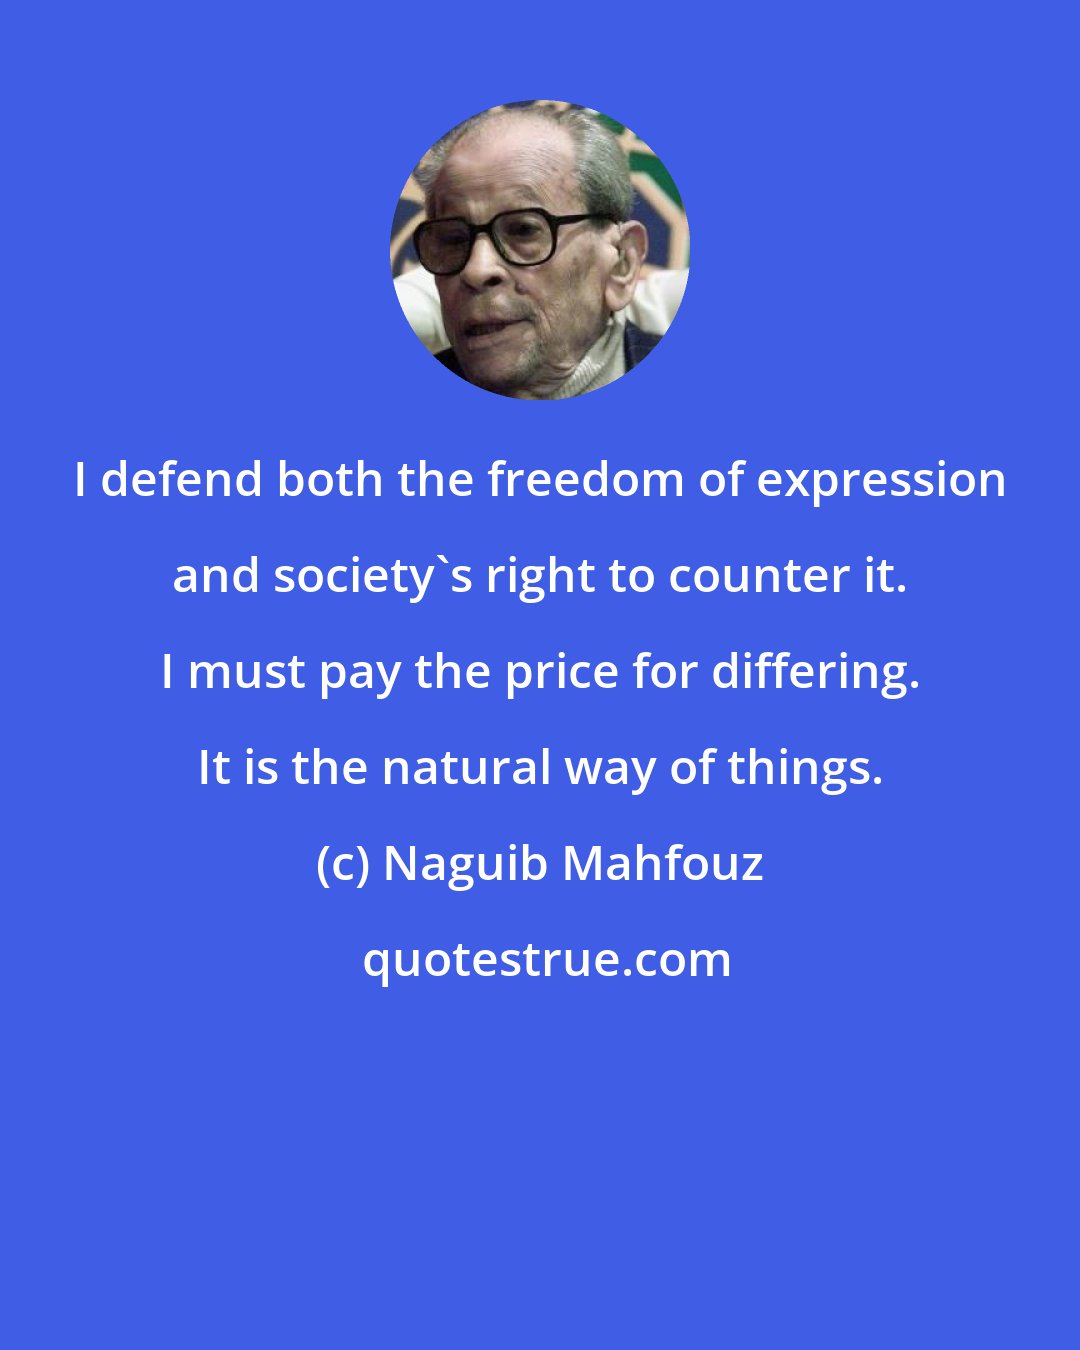 Naguib Mahfouz: I defend both the freedom of expression and society's right to counter it. I must pay the price for differing. It is the natural way of things.